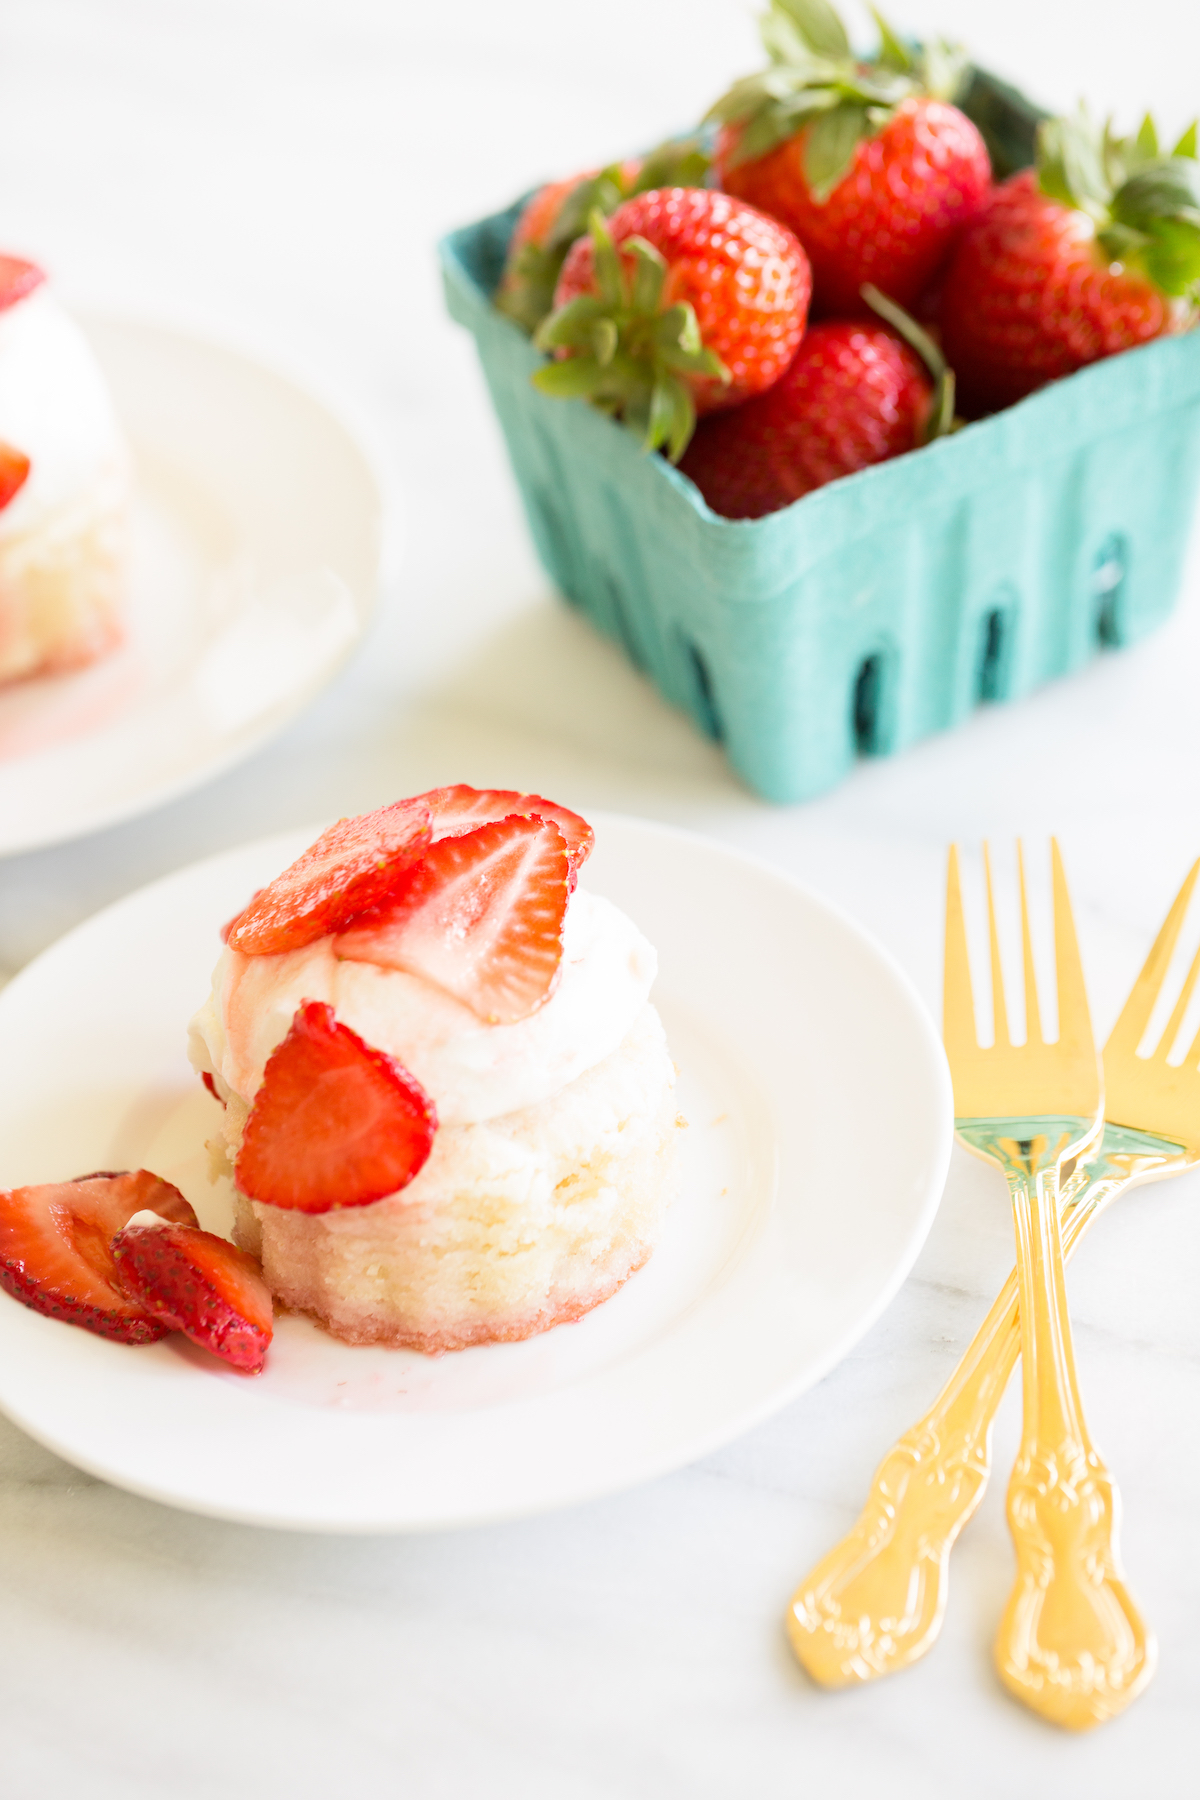 strawberry shortcake on a white plate, blue box of strawberries in background.